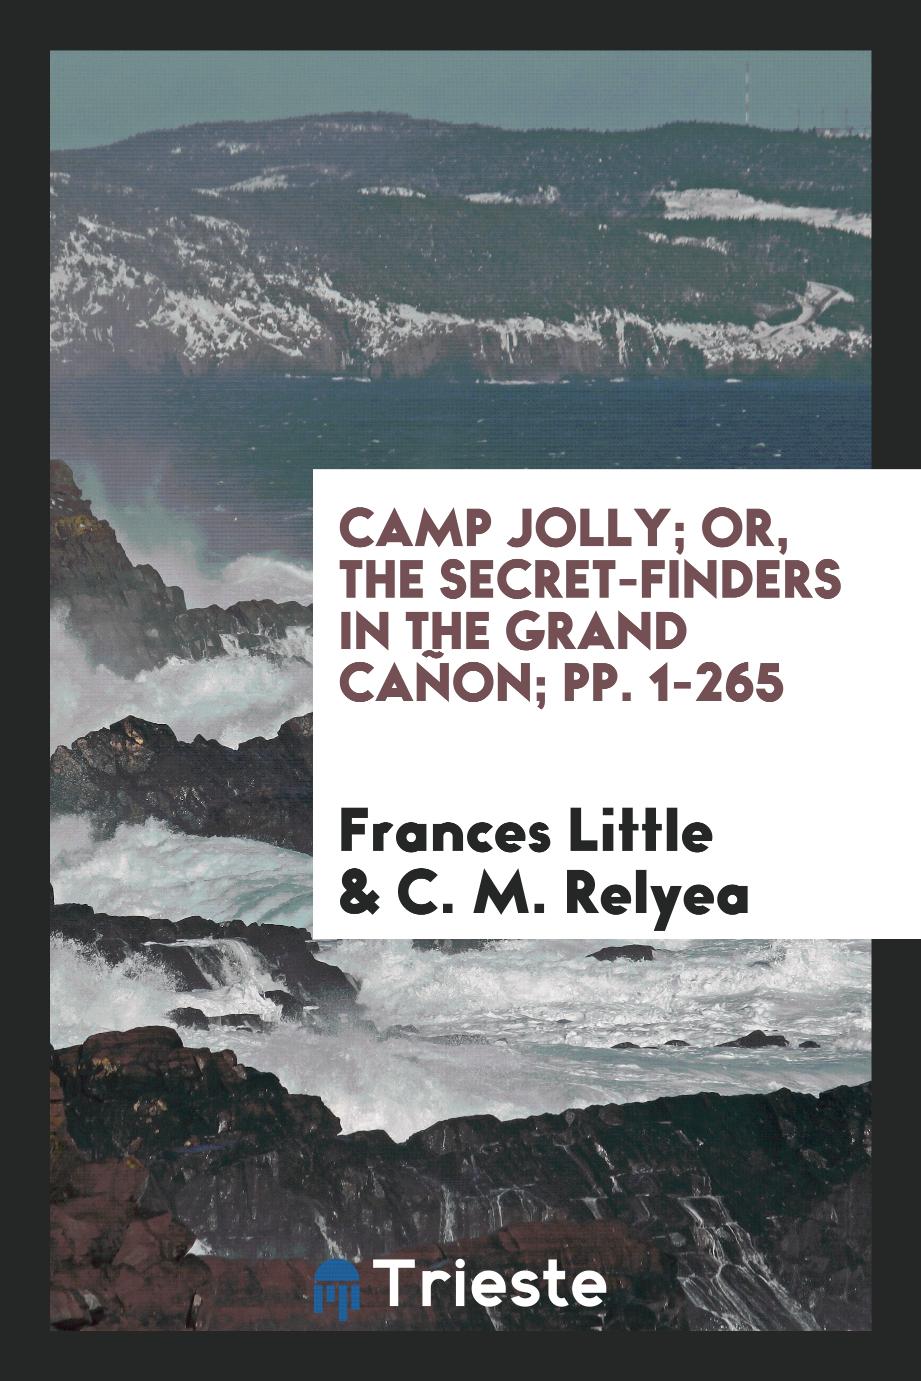 Camp Jolly; Or, The Secret-Finders in the Grand Cañon; pp. 1-265